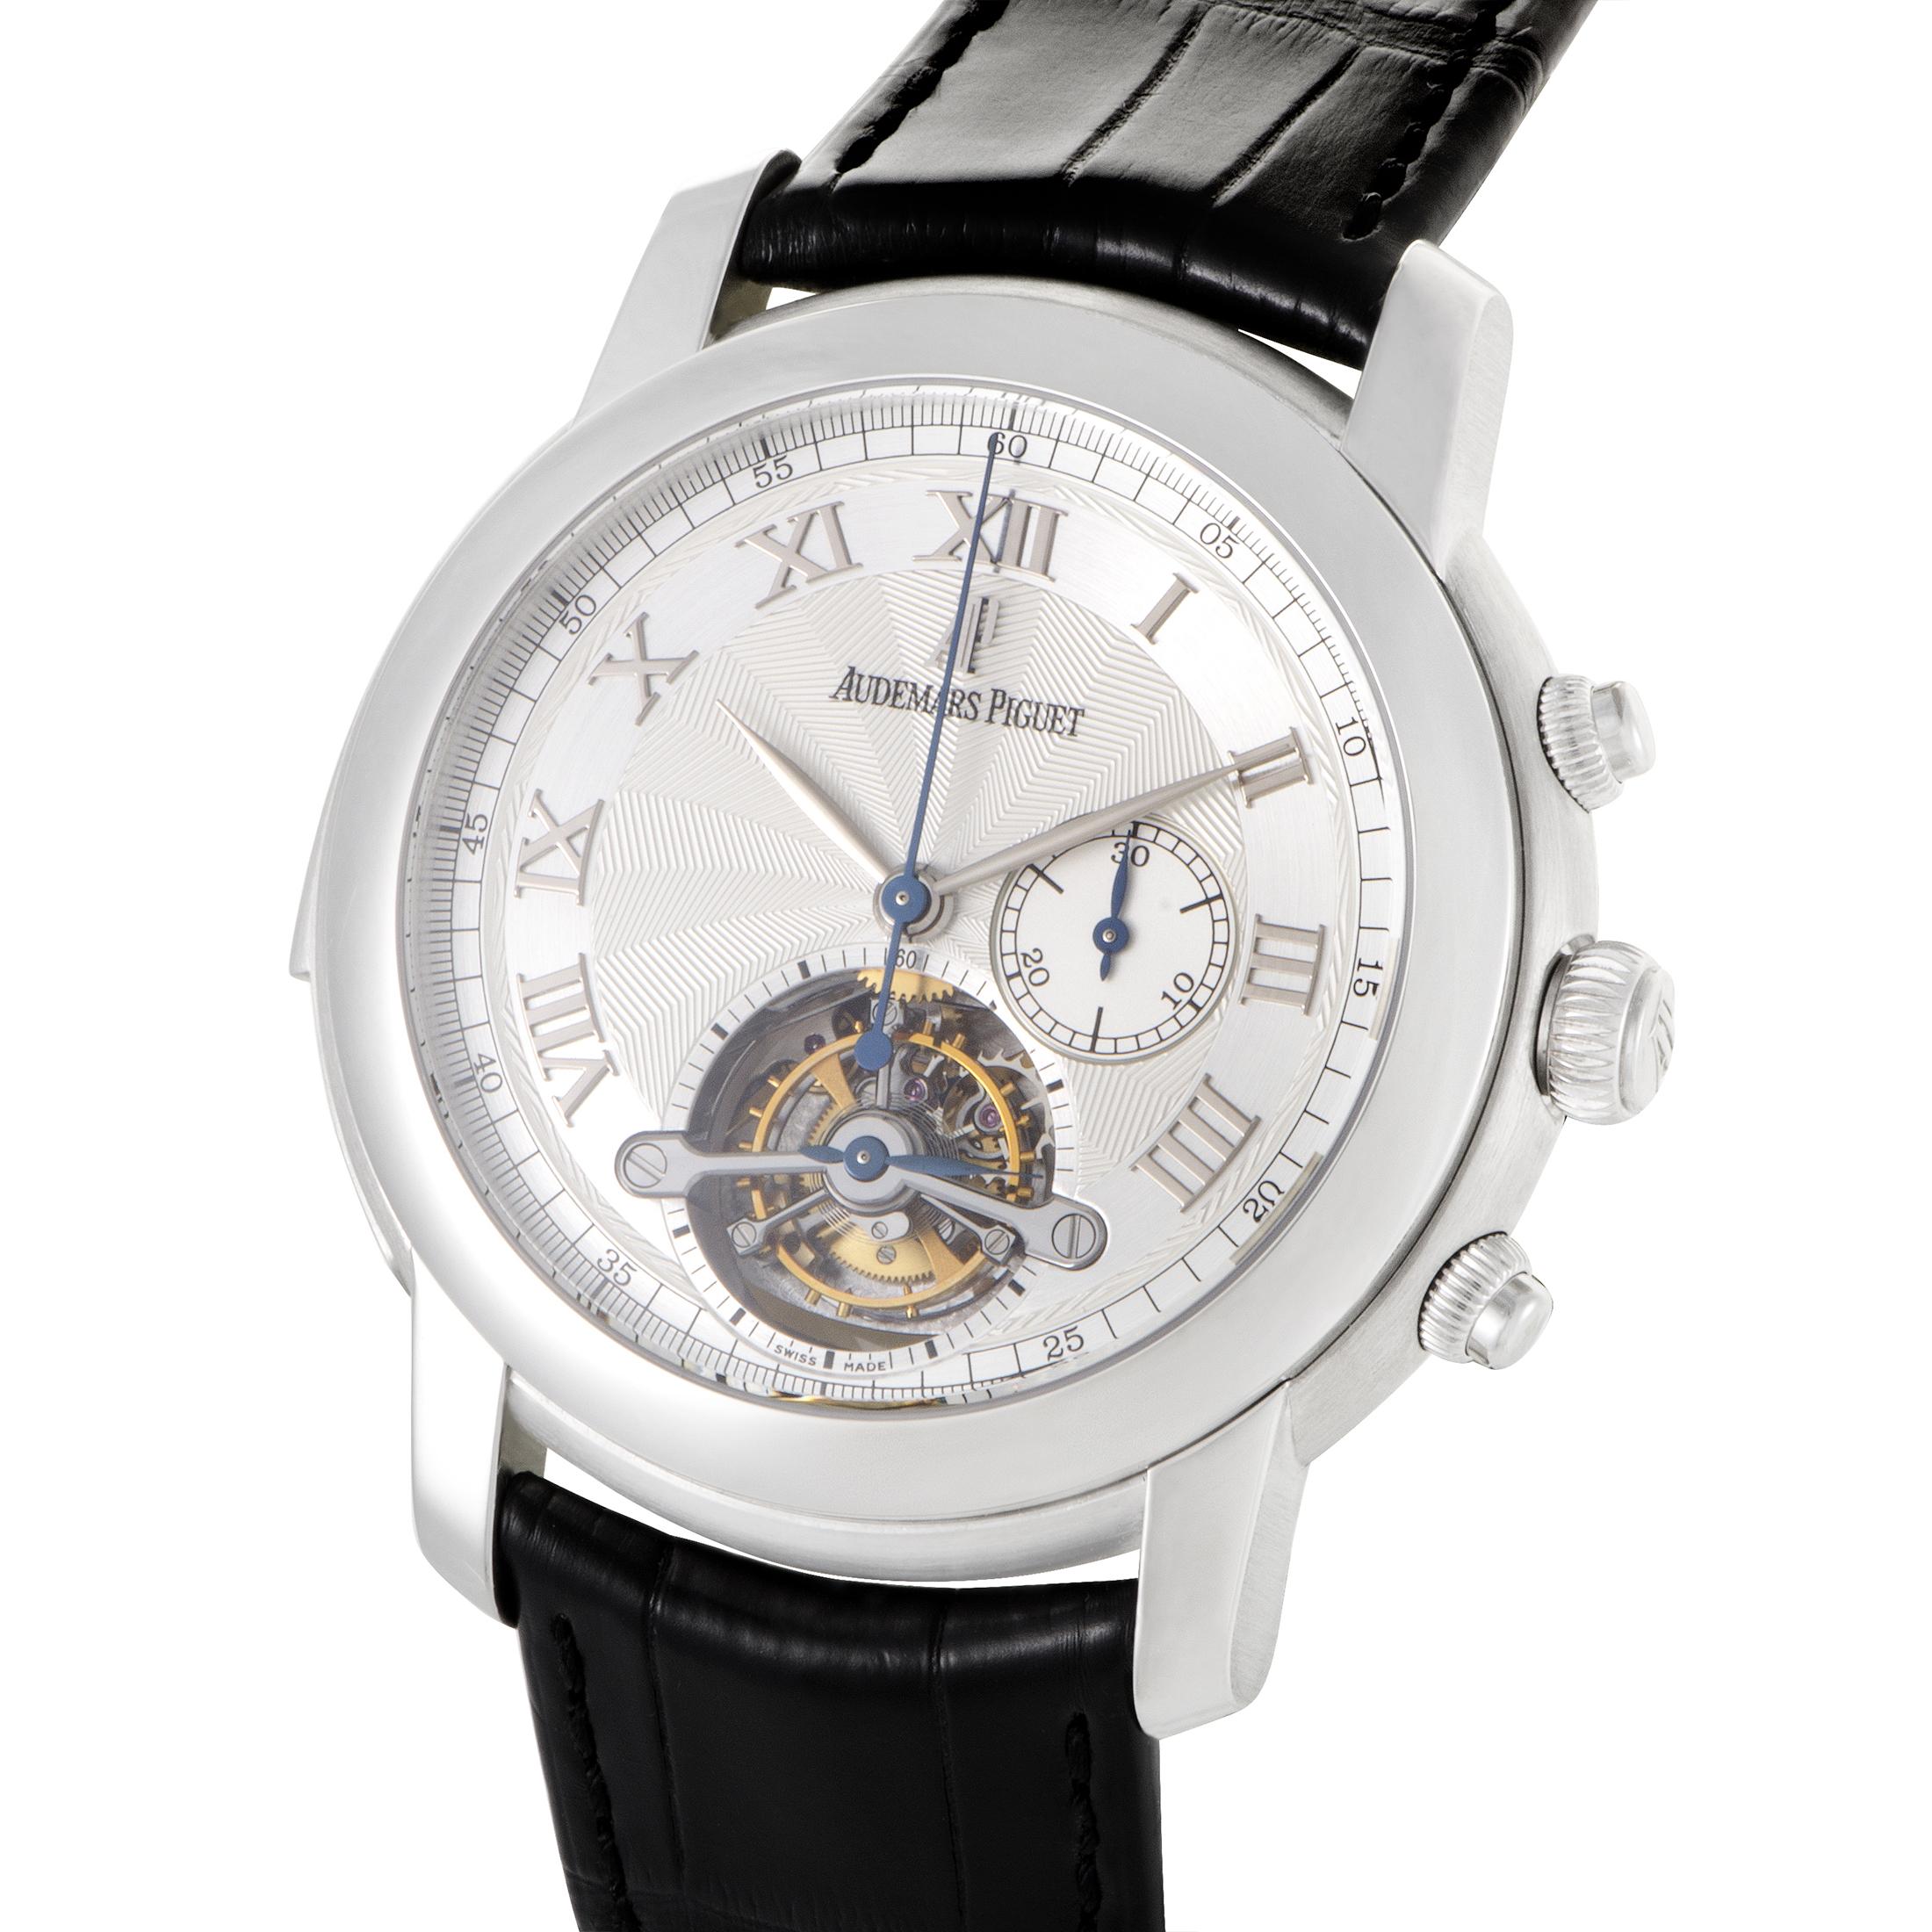 The functions of this uniquely masculine Jules Audemars Minute Repeater Tourbillon watch from Audemars Piguet are hours, minutes, seconds, minute repeater, and tourbillon. These functions are cleverly set out on a stylish silver dial that is